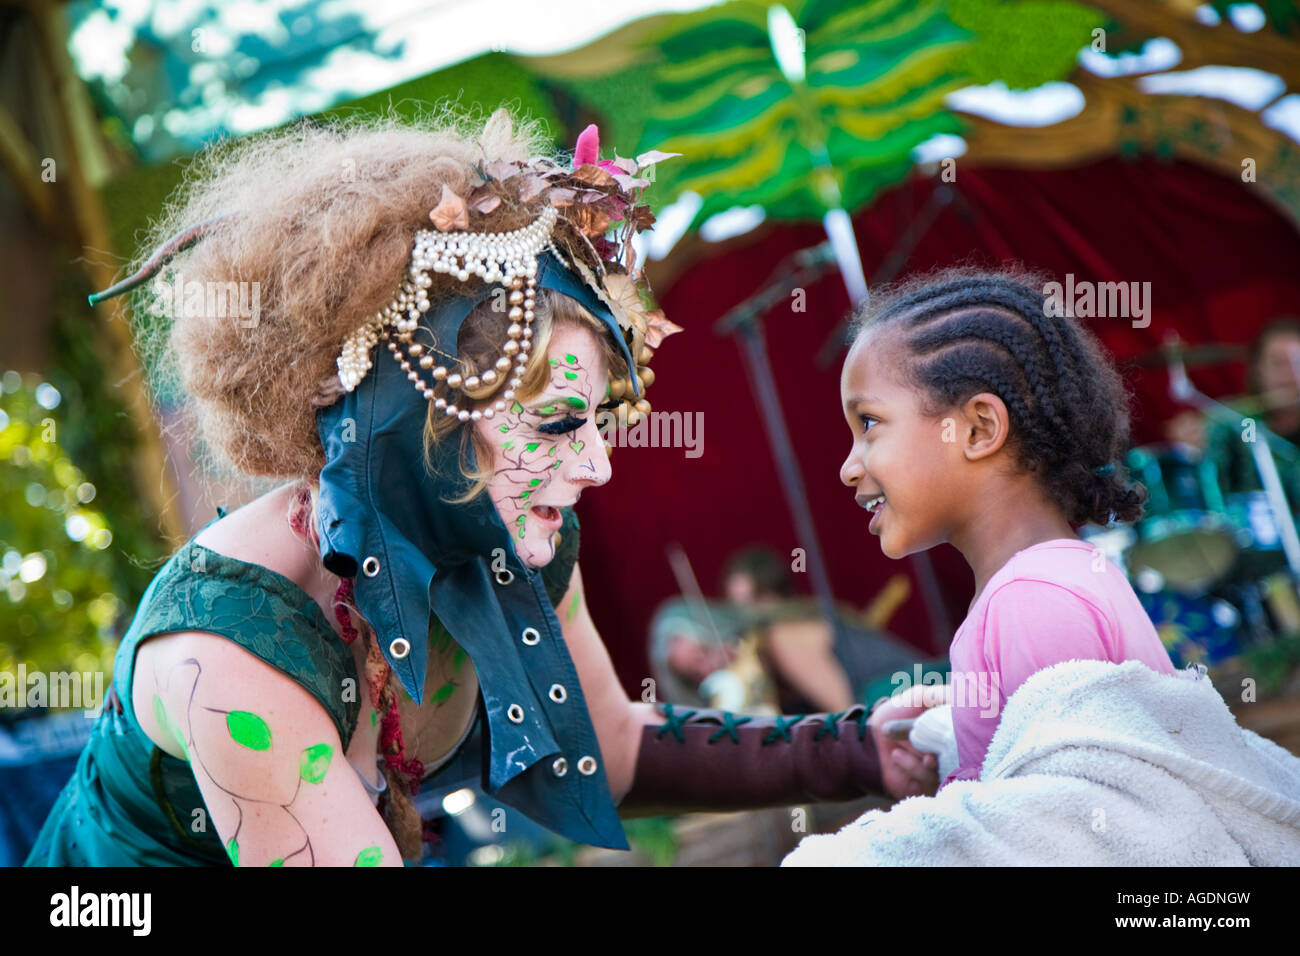 A lady advocating an eco-friendly lifestyle, and dressed as a wood nymph, dances with a pretty young girl at the Thames Festival Stock Photo